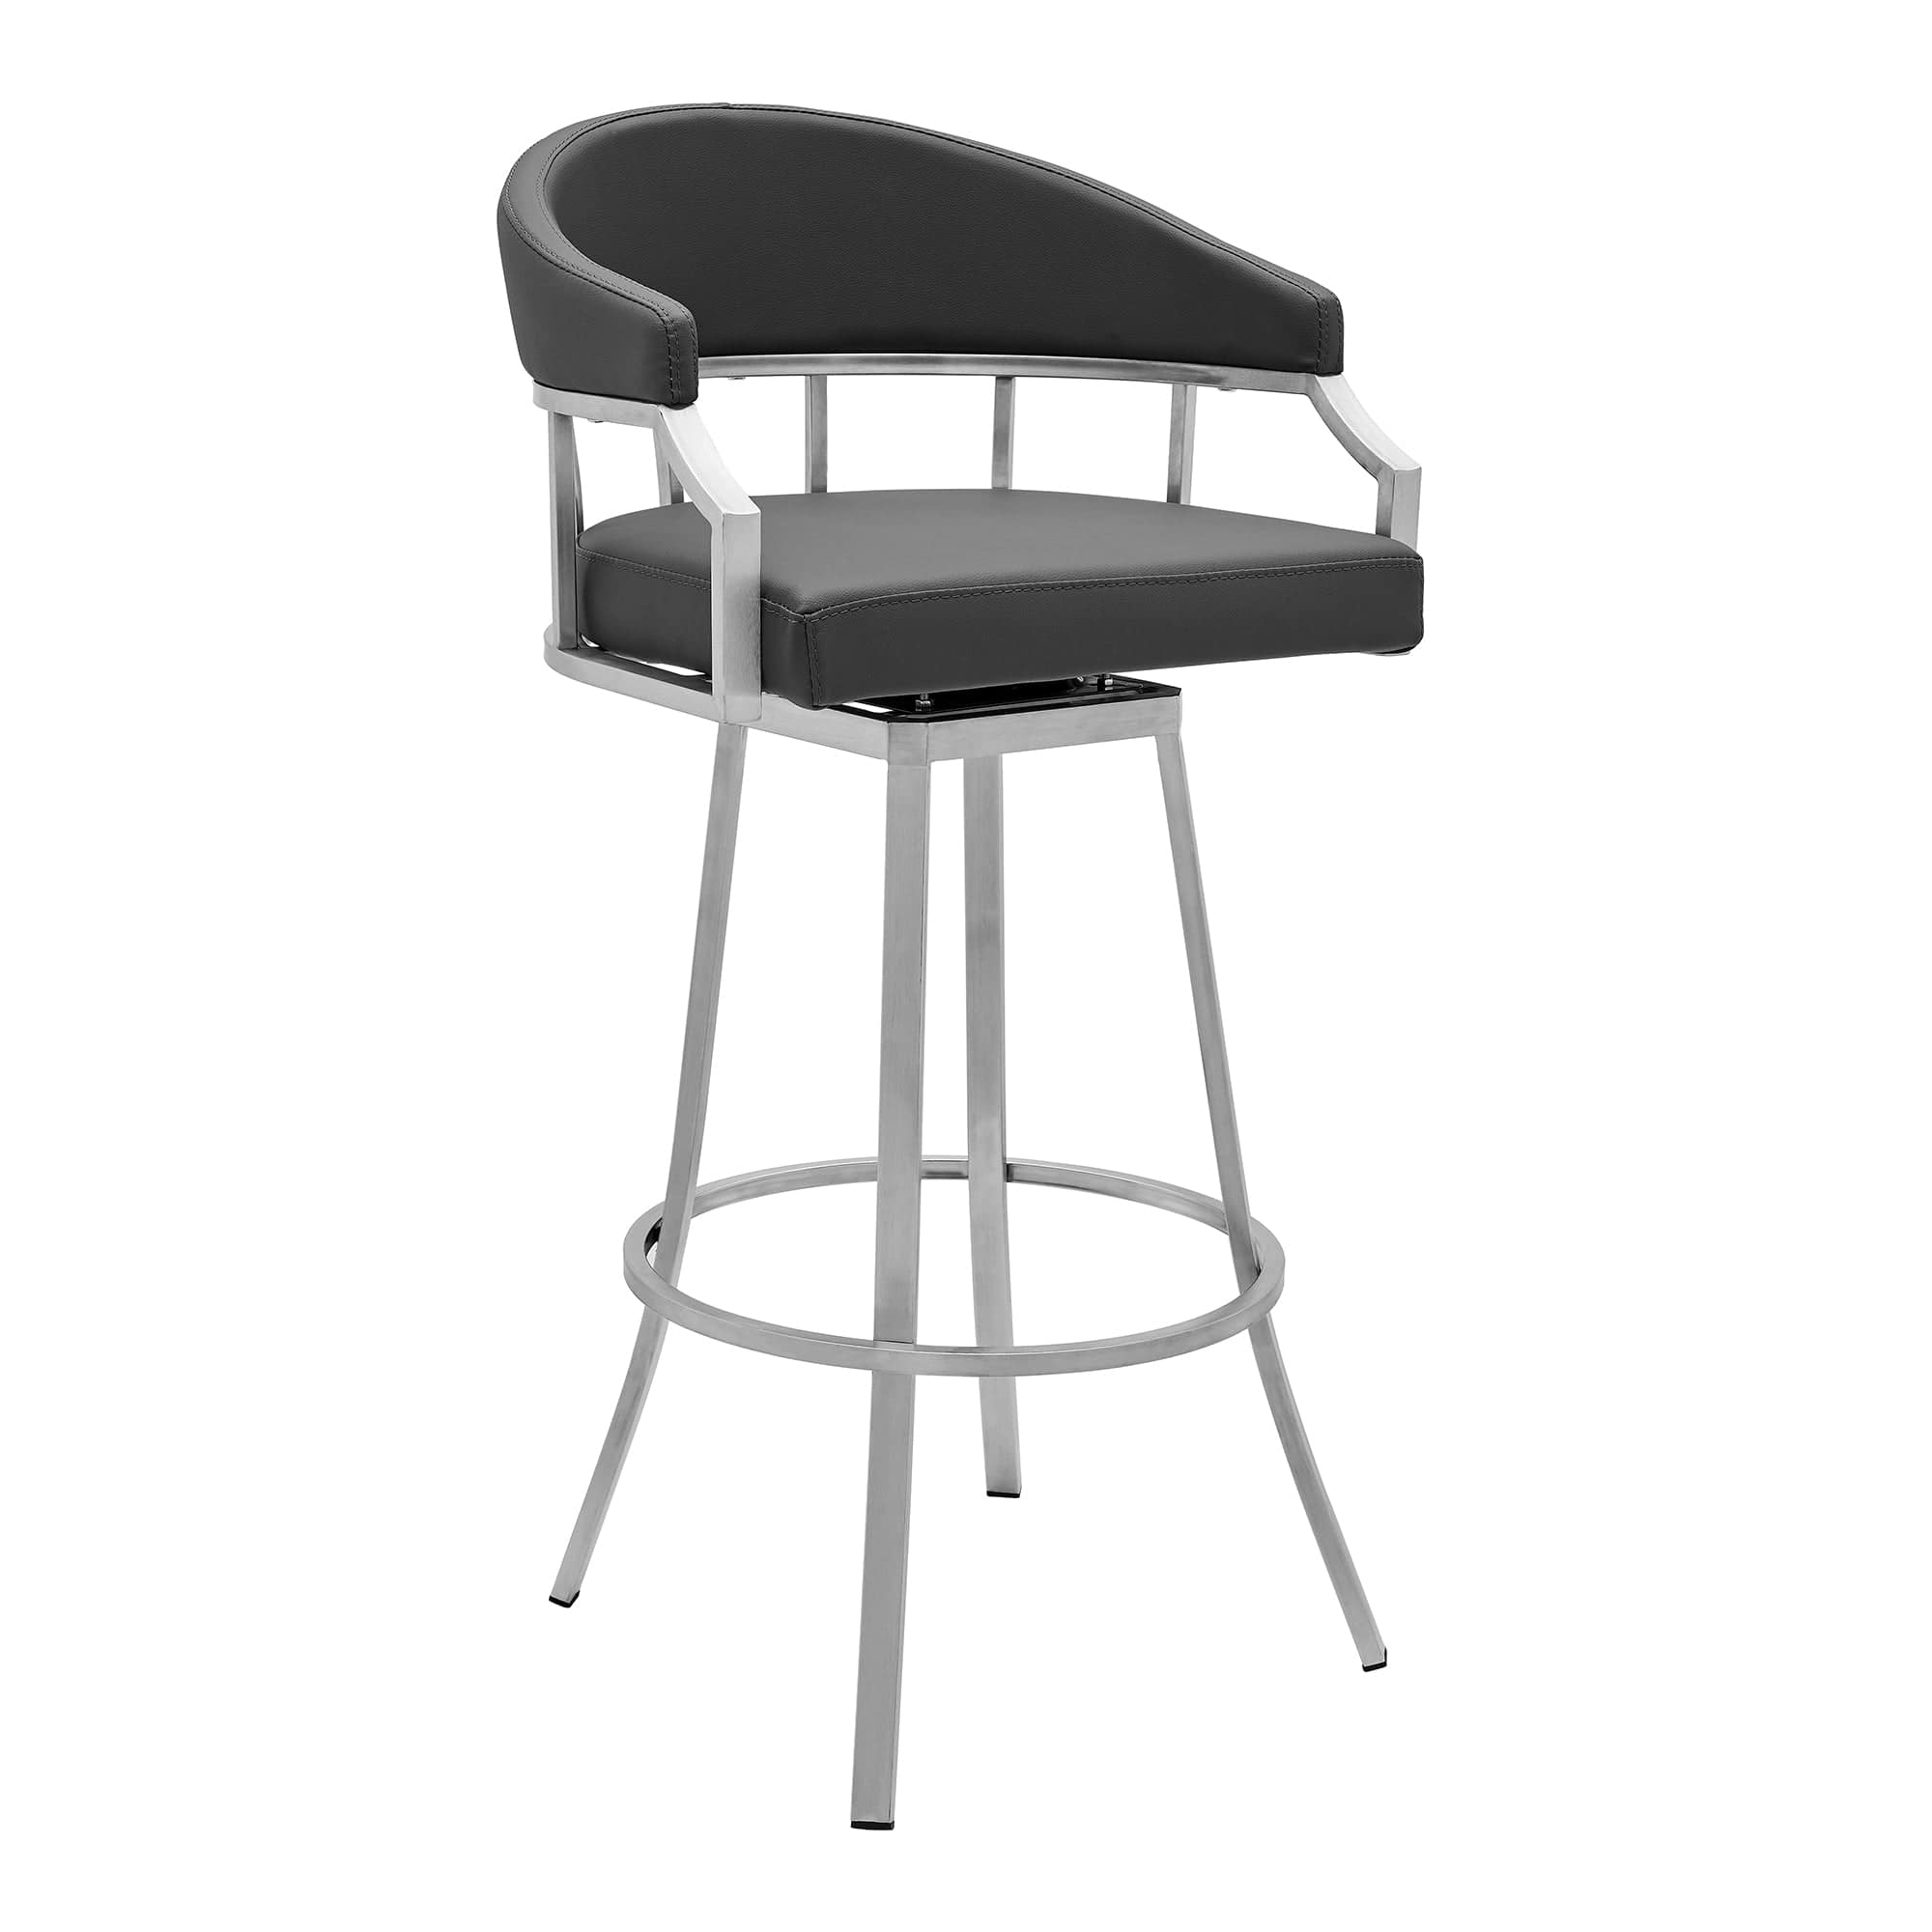 Armen Living Barstool Armen Living - Valerie 26" Counter Height Swivel Modern Faux Leather Bar and Counter Stool in Brushed Stainless Steel Finish | LCVLBABSSG26